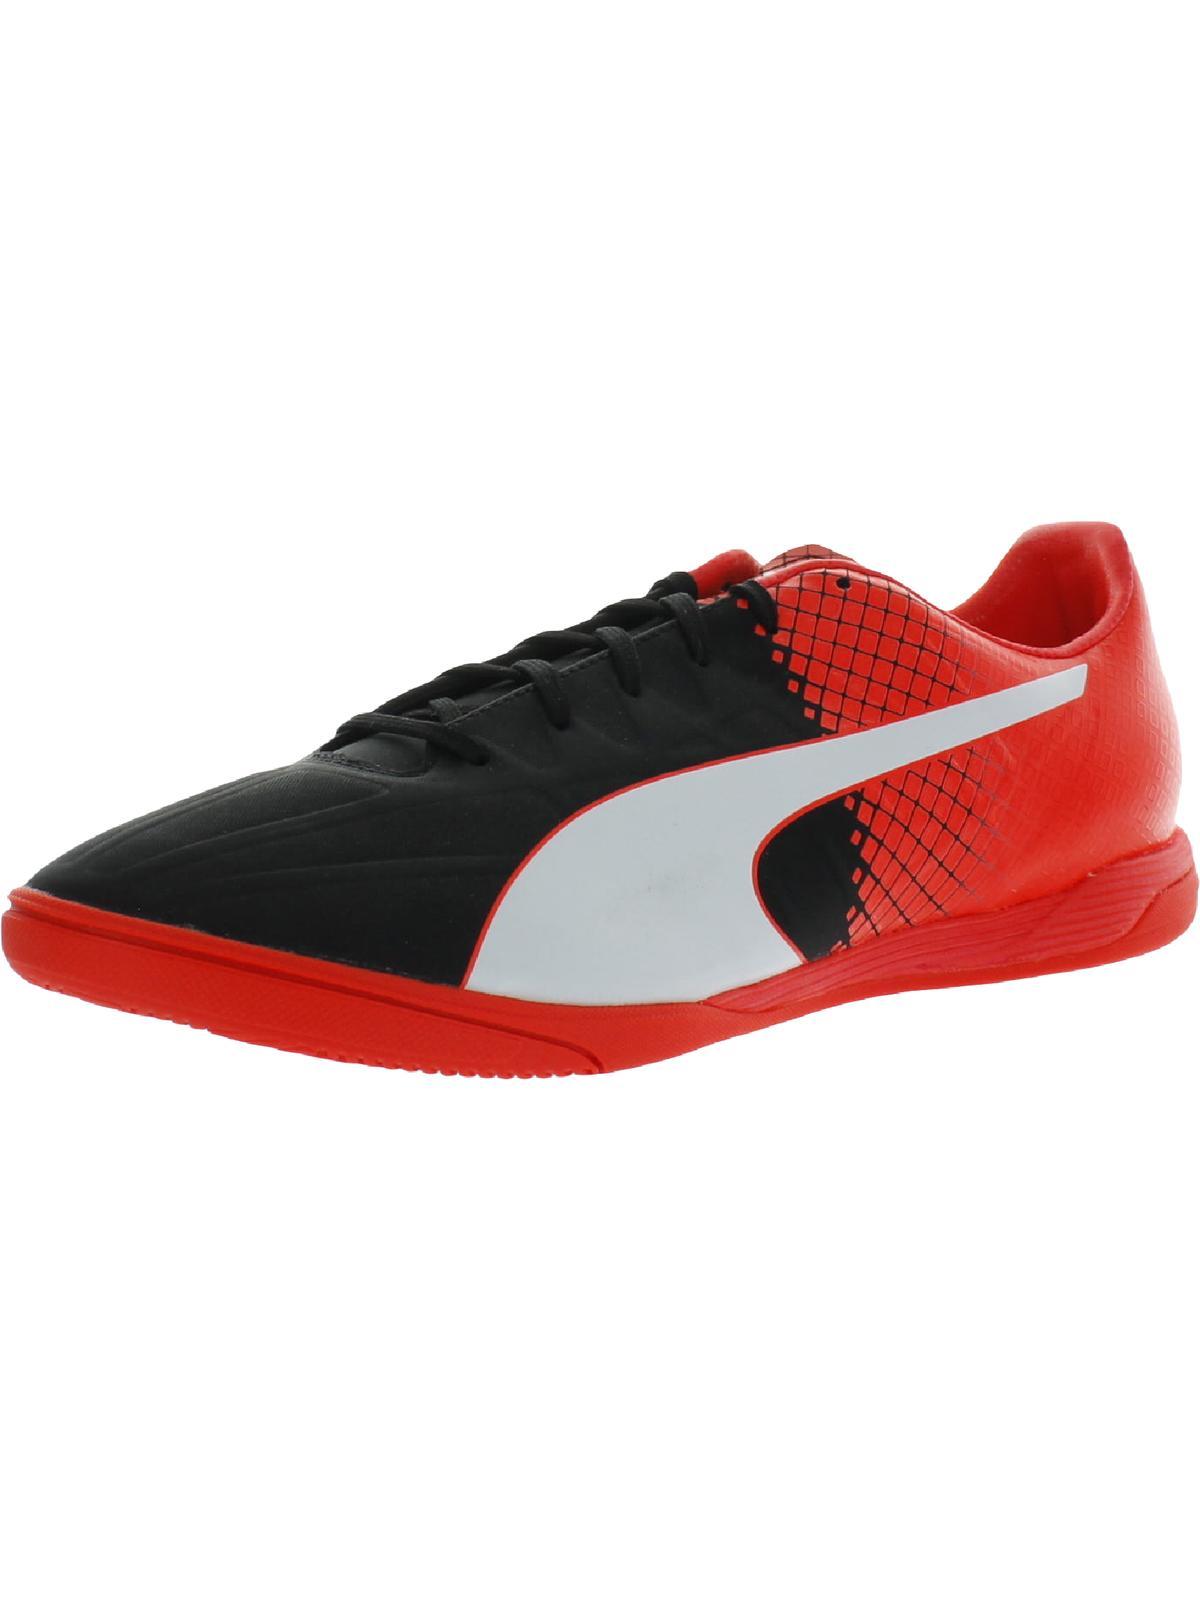 PUMA Evospeed 4.5 It Fitness Performance Athletic And Training Shoes in Red  for Men | Lyst